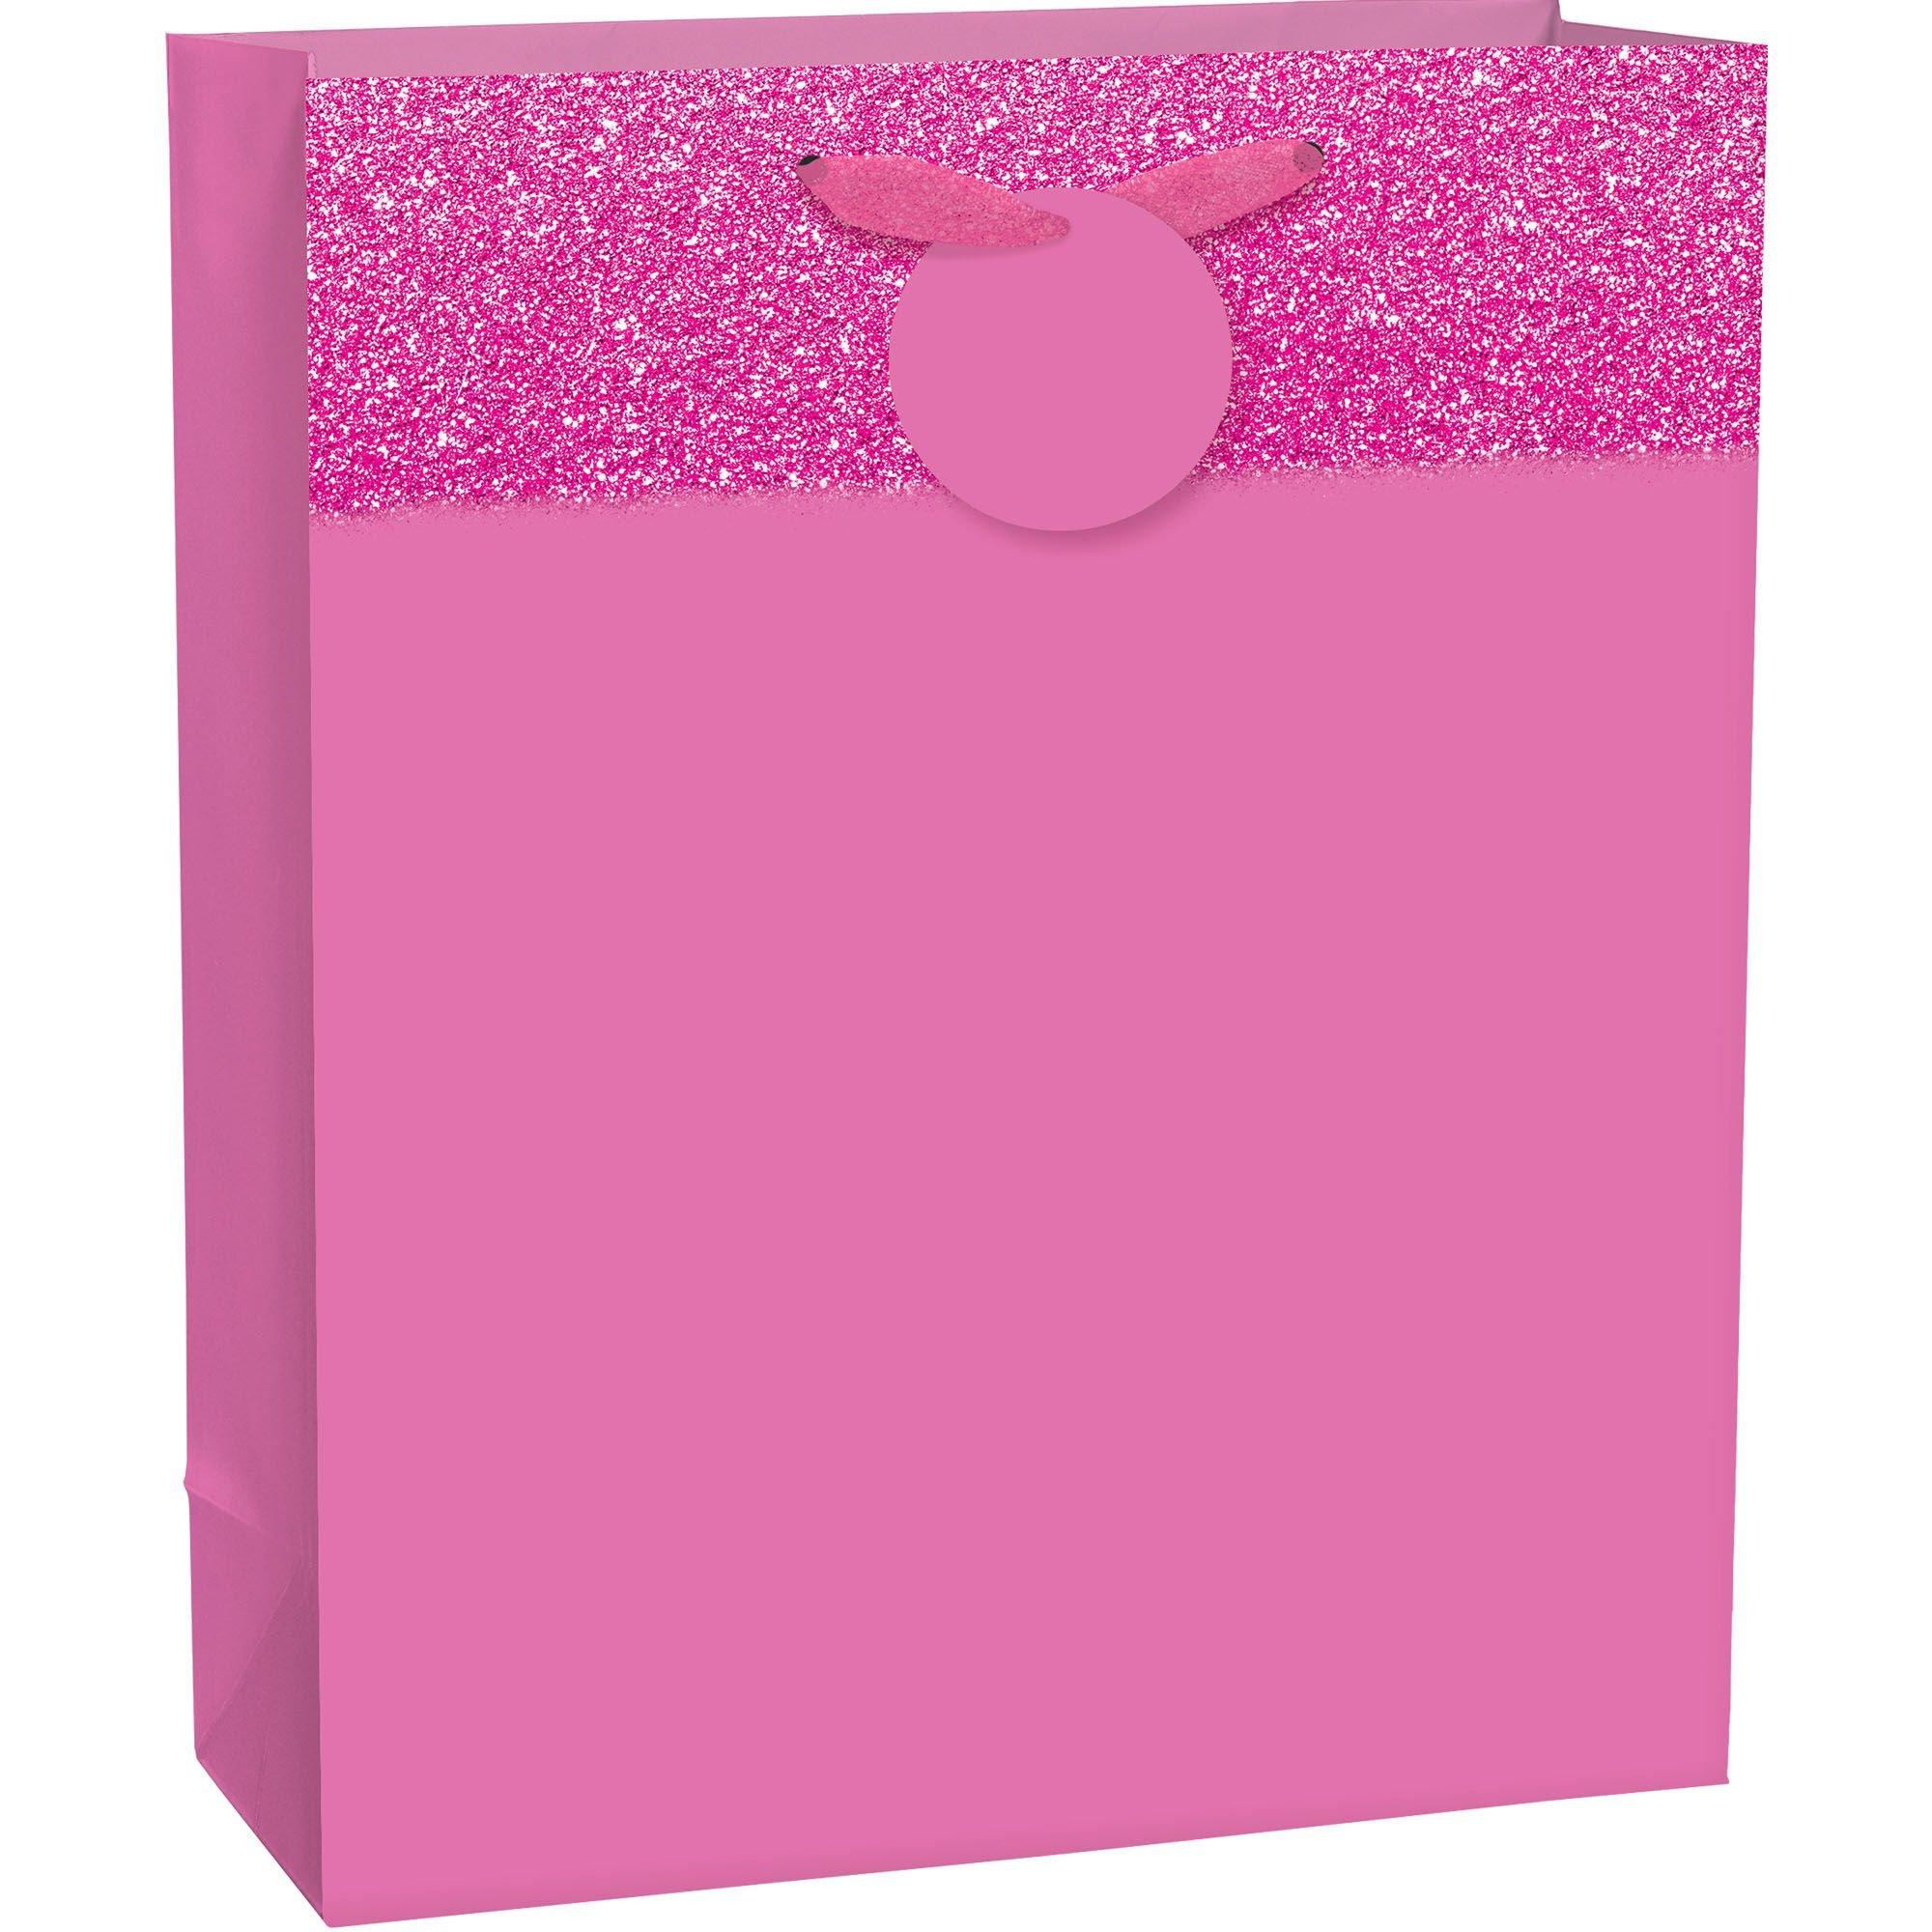 Amscan Large Glitter & Matte Bright Pink Gift Bag 10 1/2in x 13in